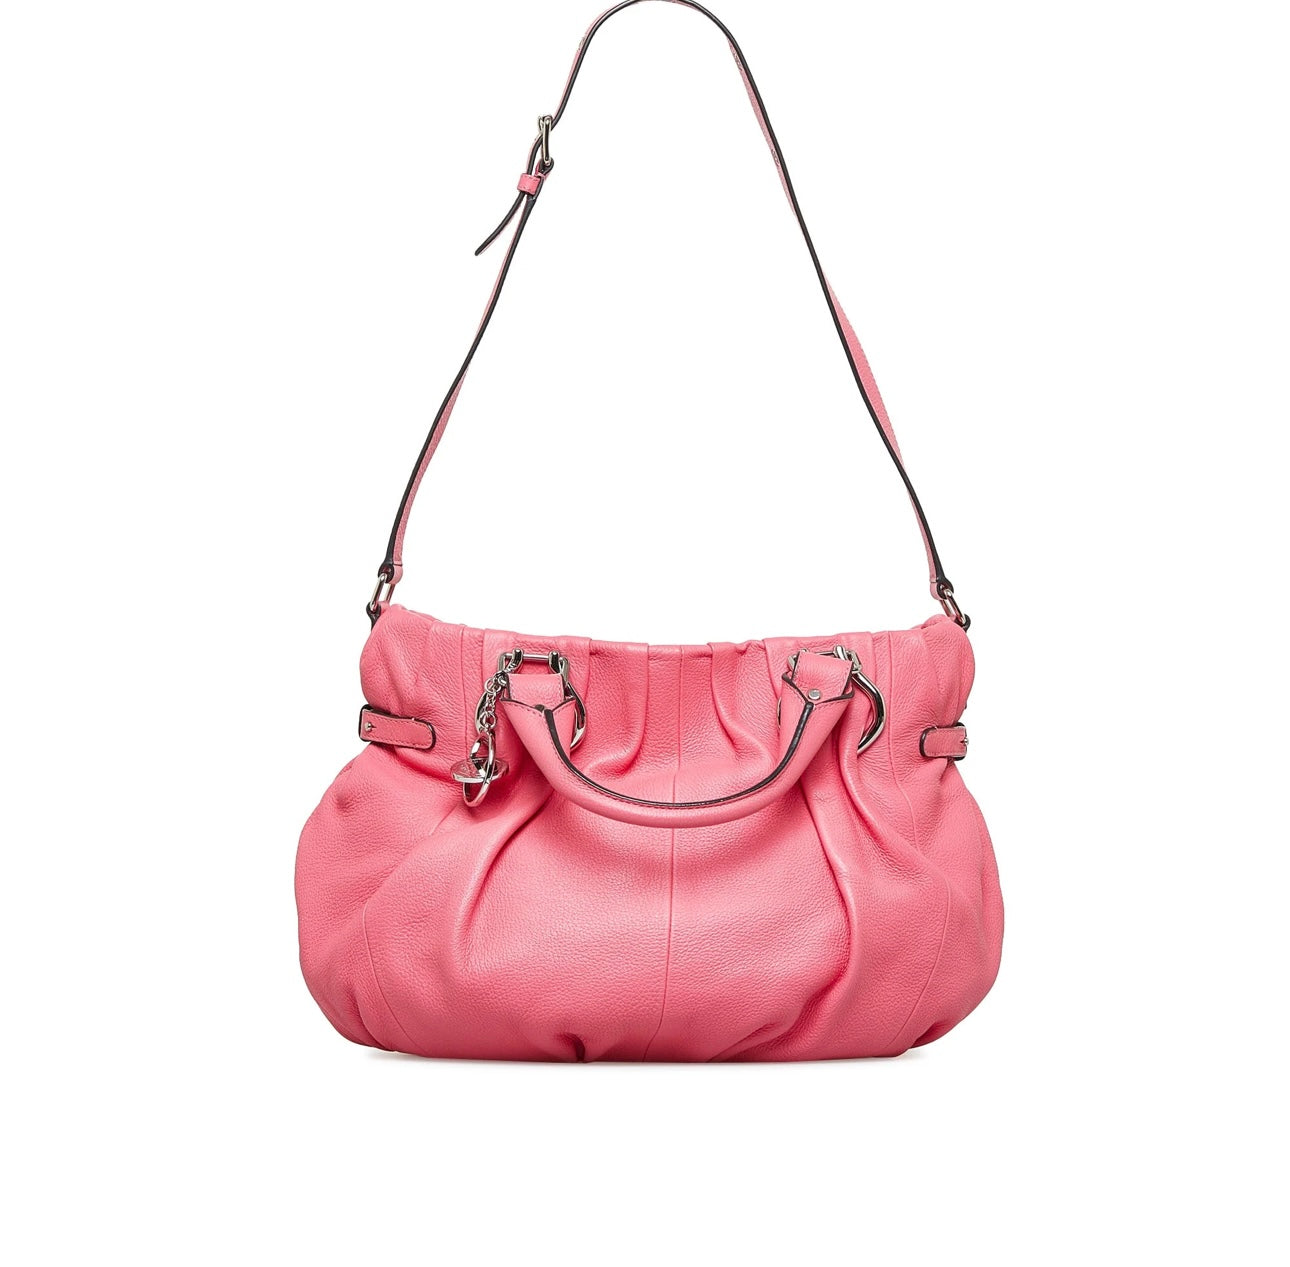 Pre-Owned Authentic Celine Leather Satchel-Pink